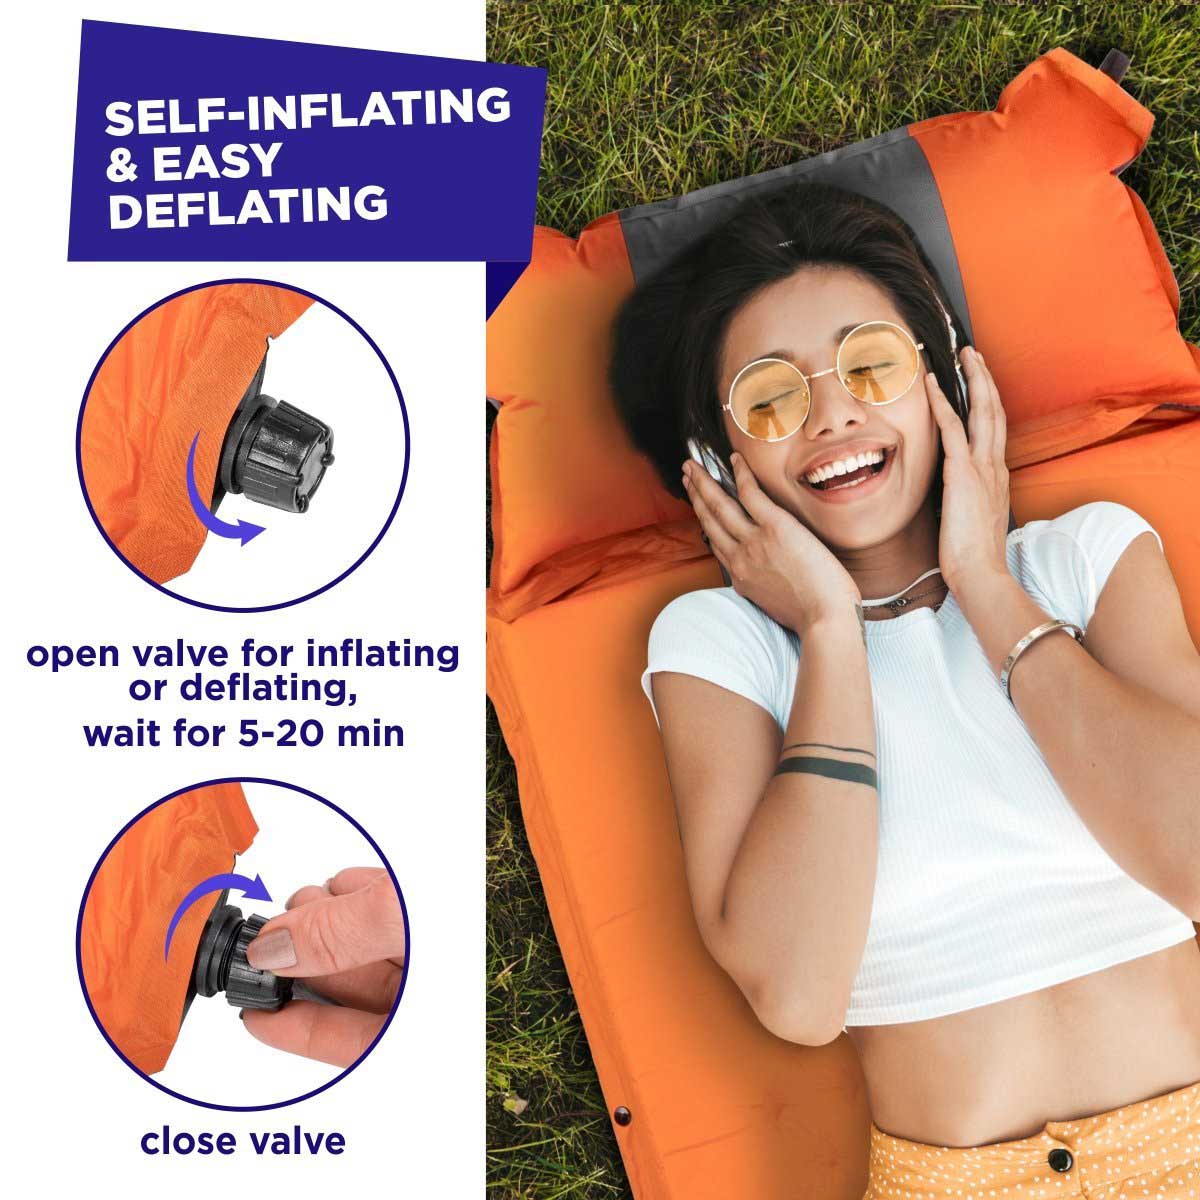 Orange Self Inflating Sleeping Pad with Pillow is very easy to setup - just open the valve, wait until the matress inflates, and close the valve